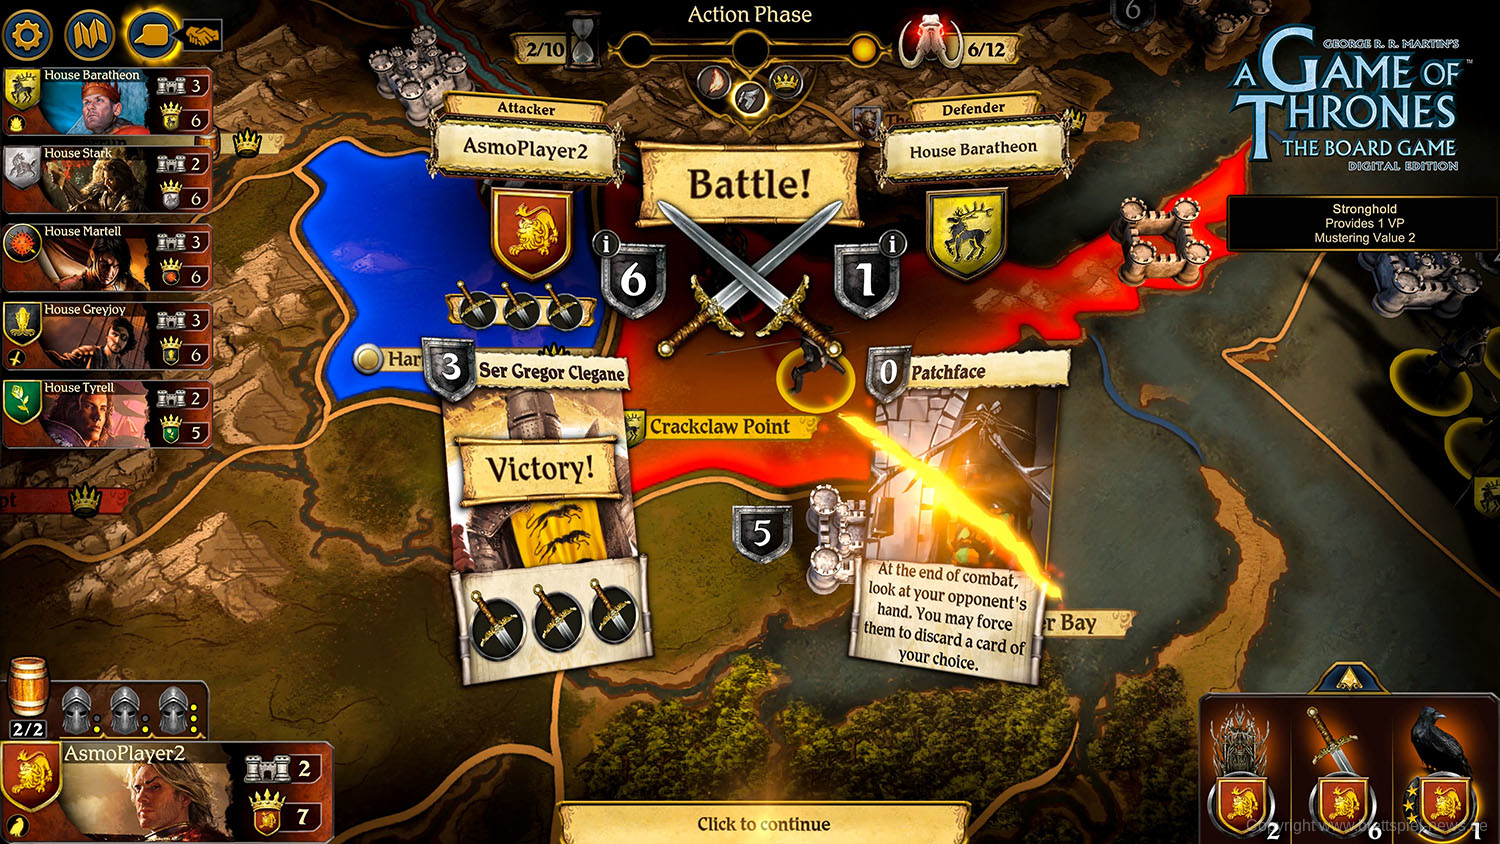 A Game of Thrones The Board Game Digital Edition Screenshot 3